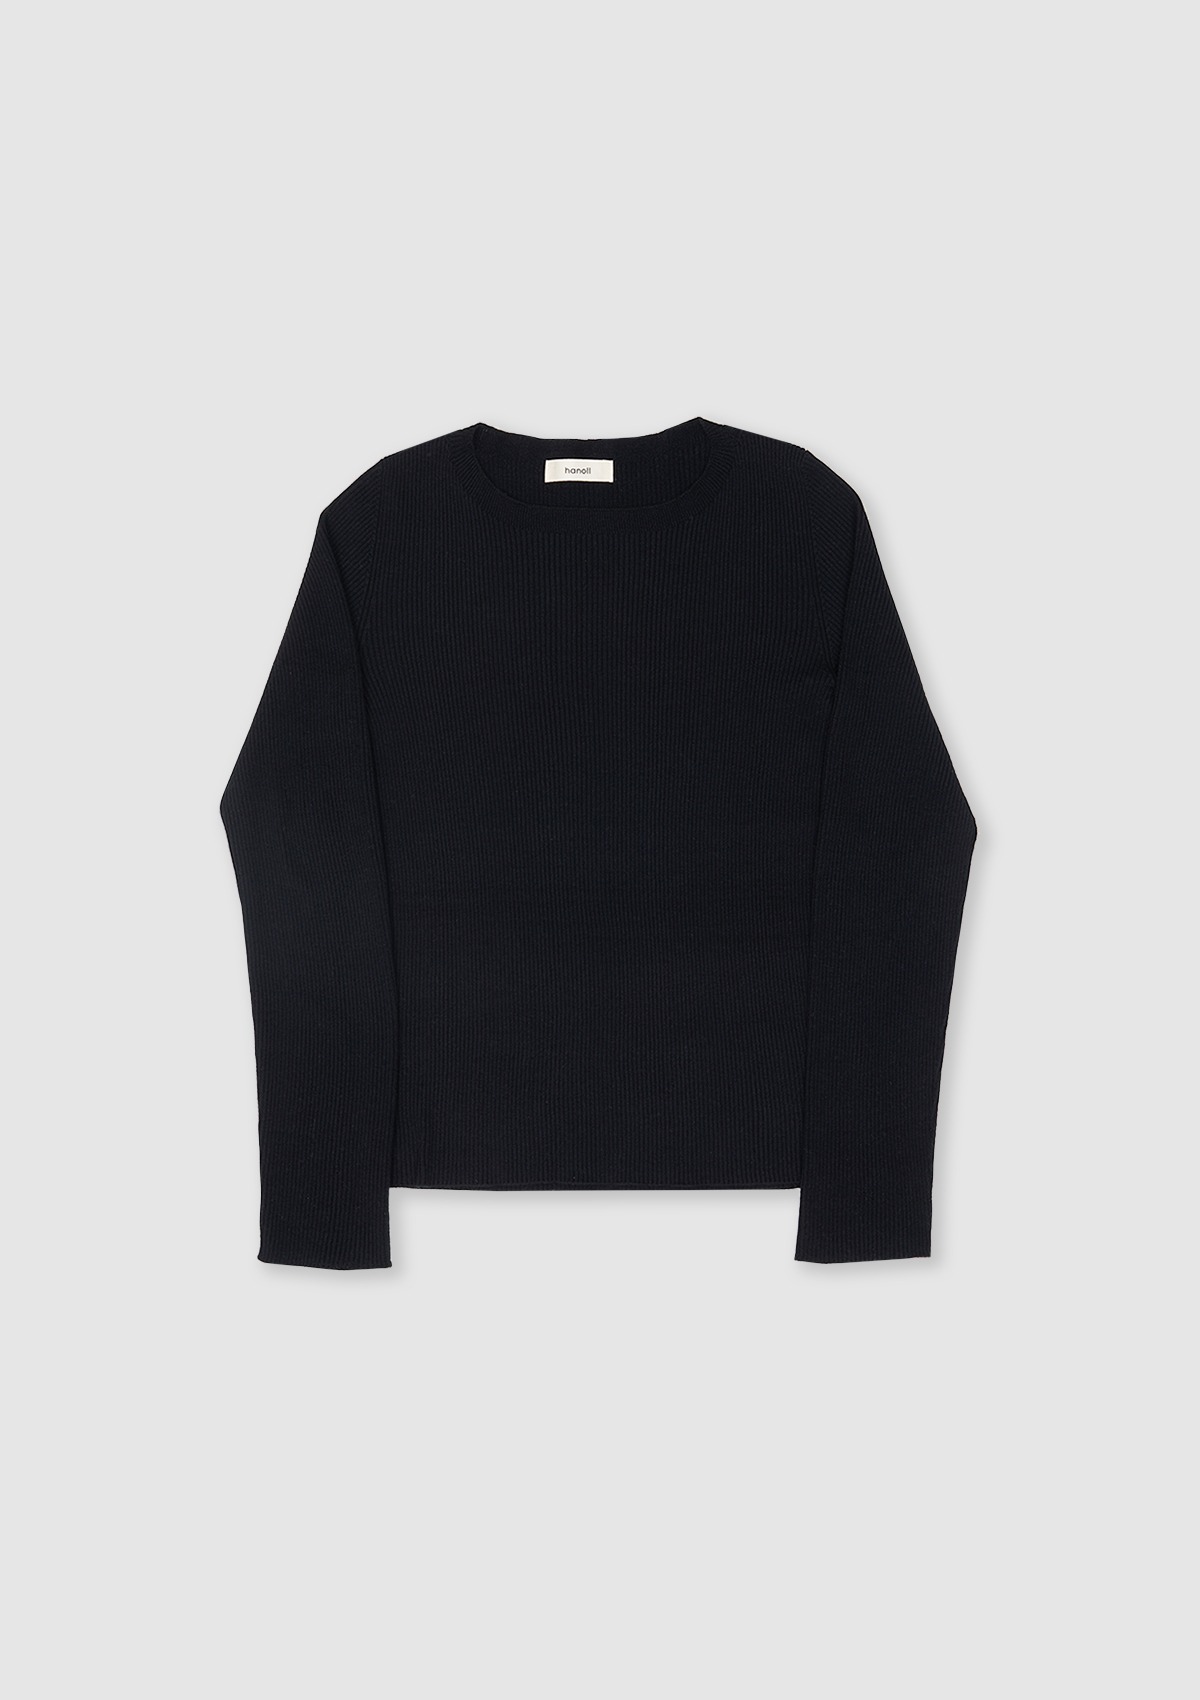 Spring Pure Knit (Black)